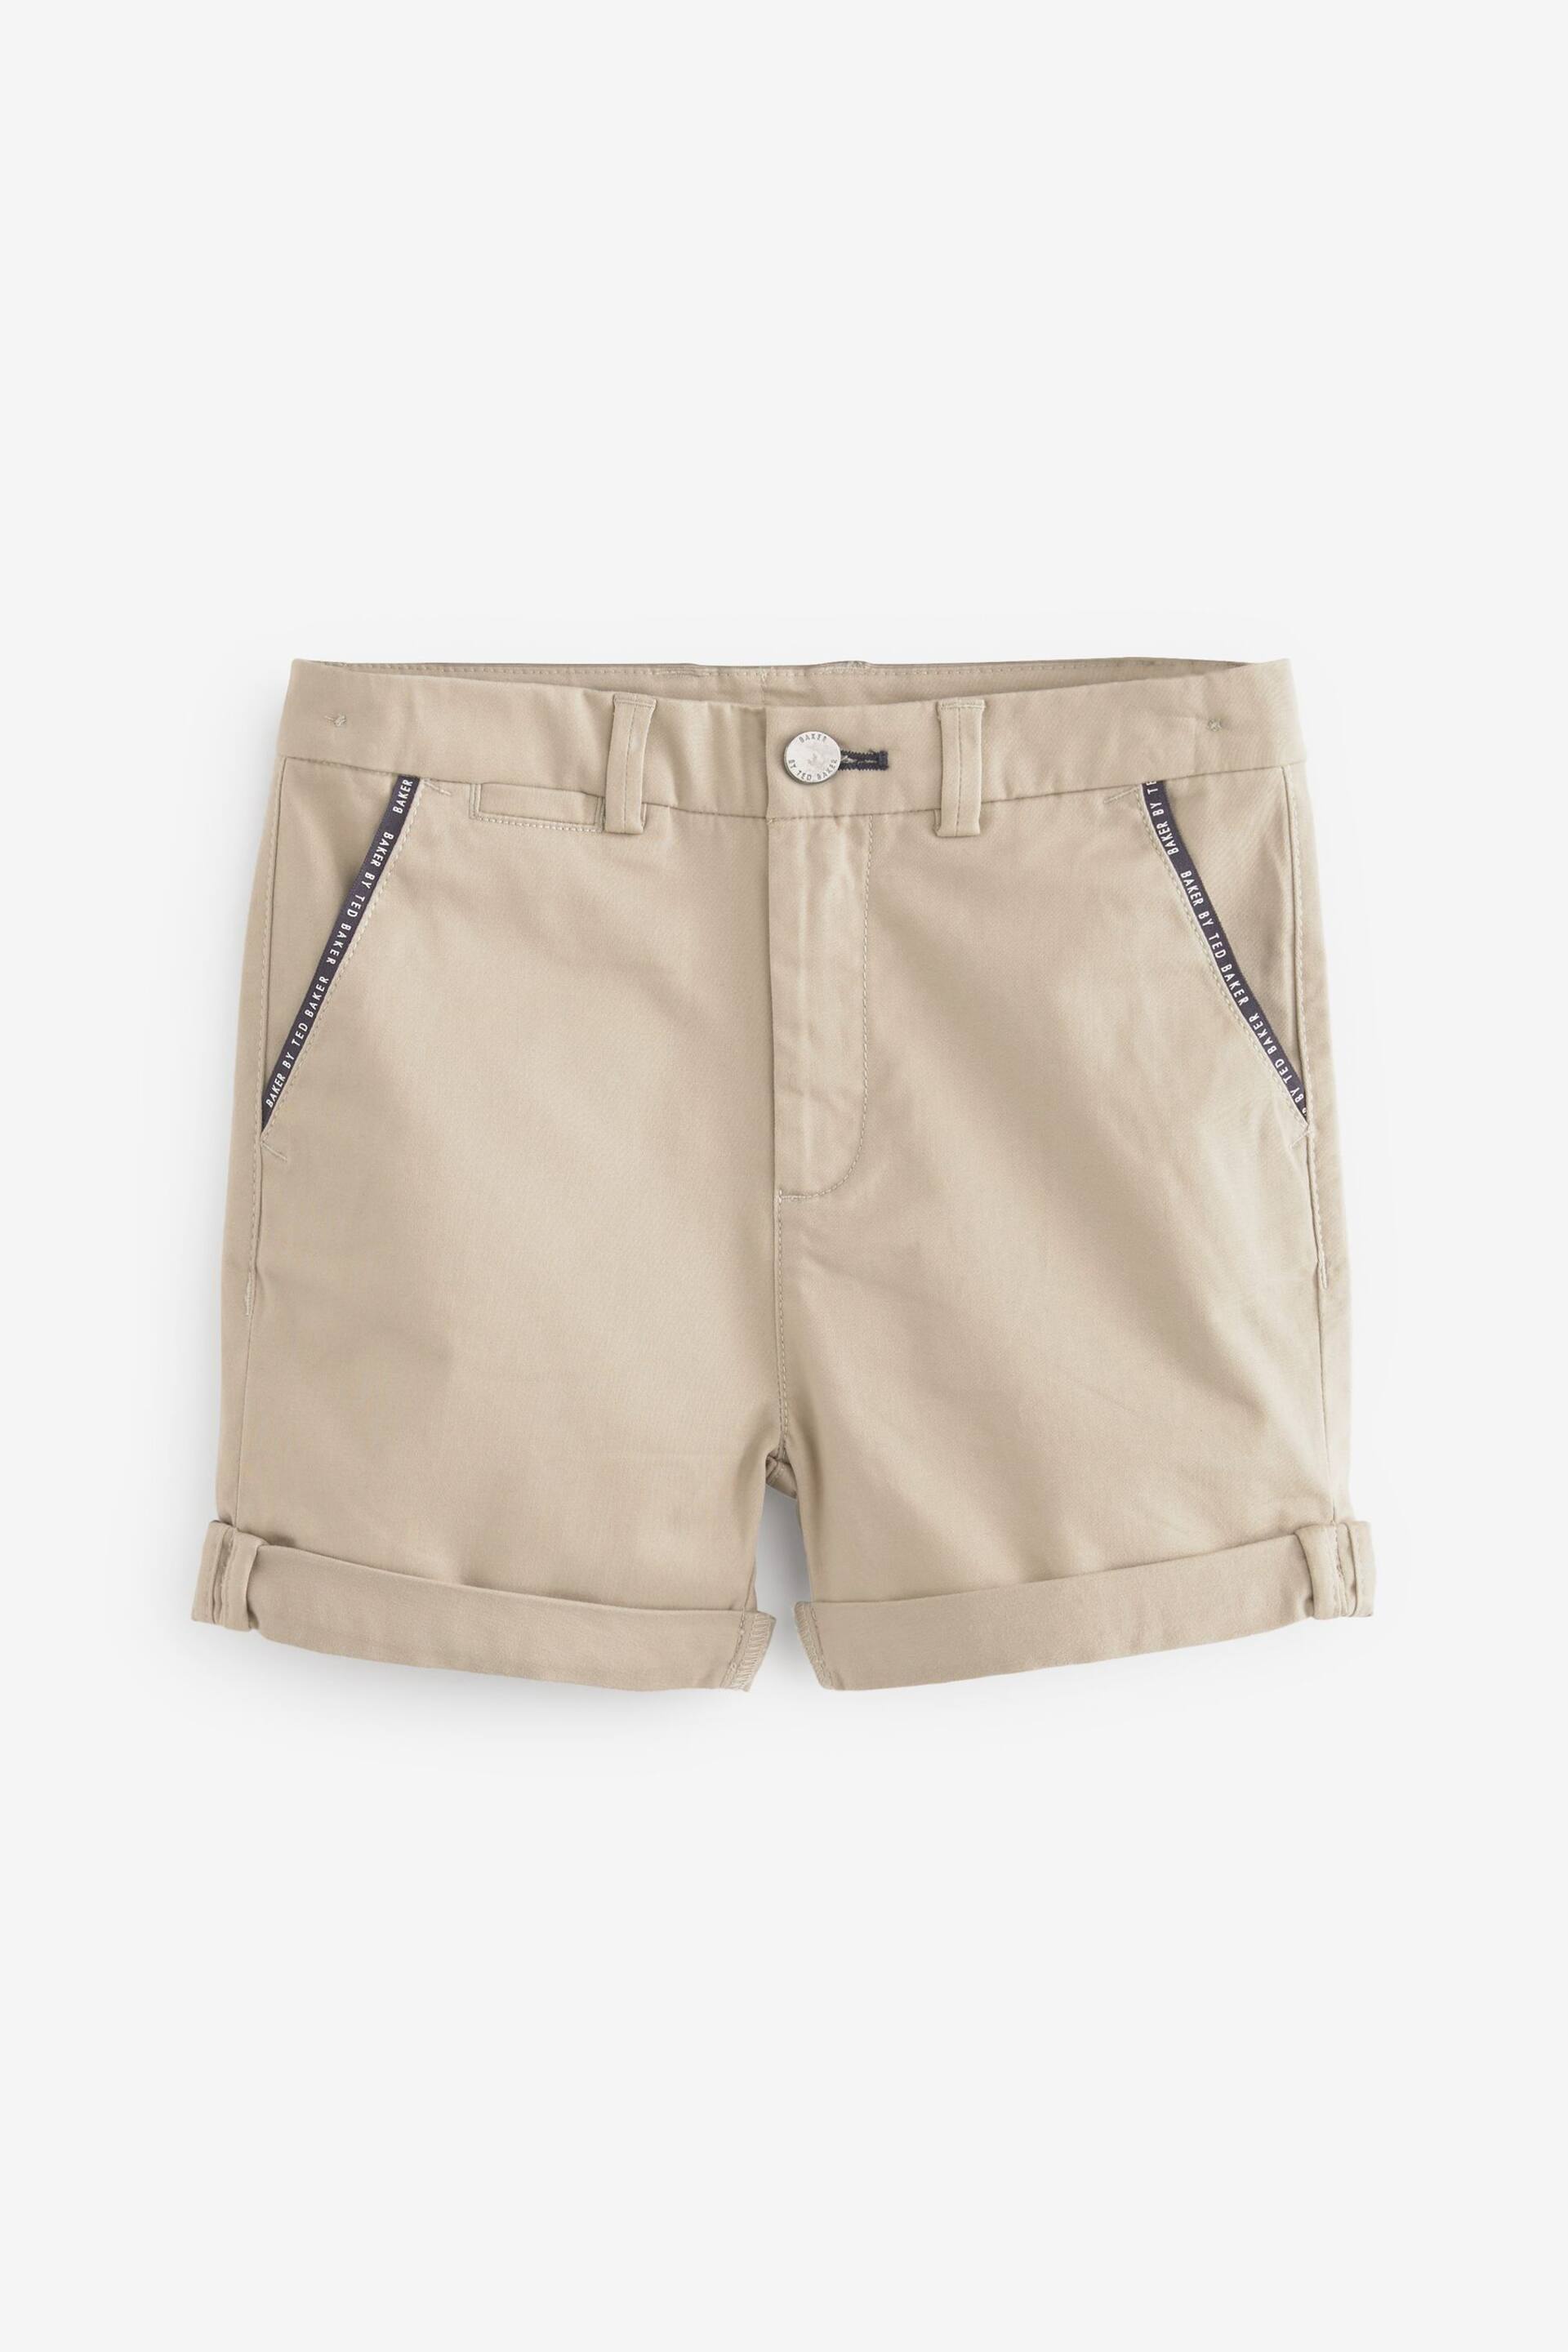 Baker by Ted Baker Chino Shorts - Image 5 of 8